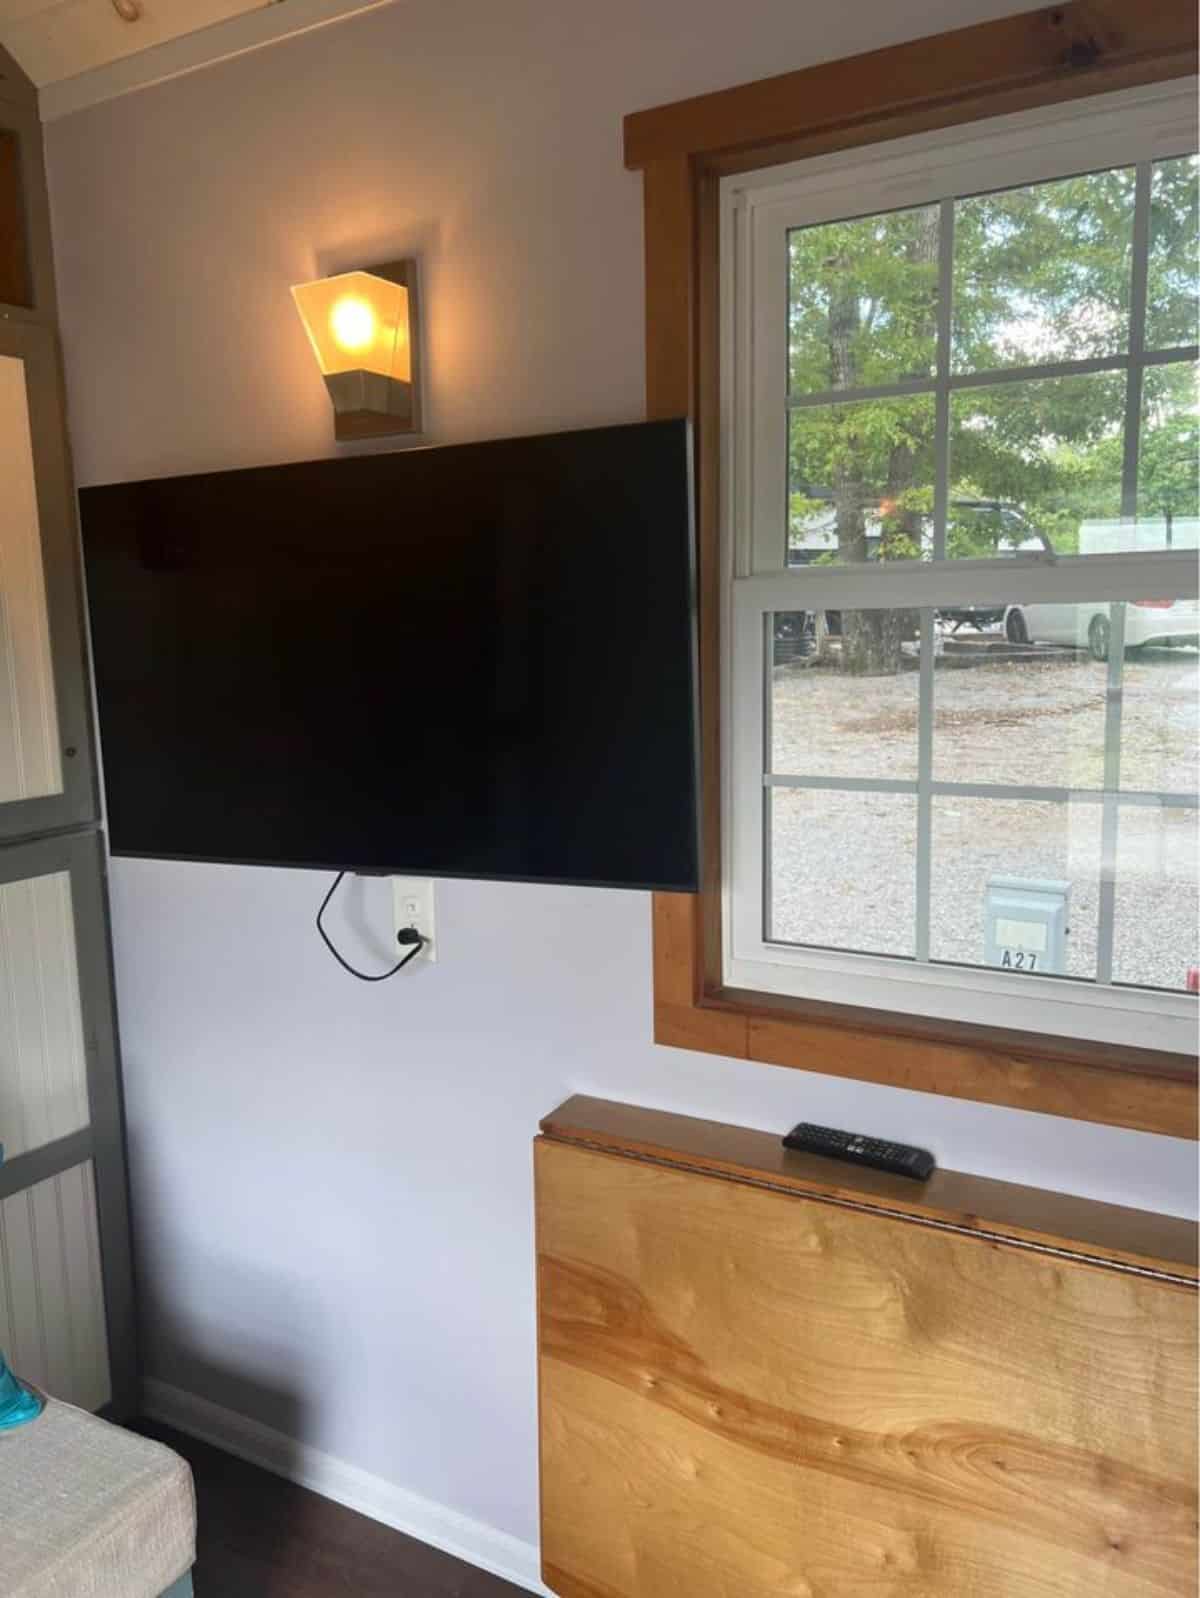 wall mounted TV set installed in living area